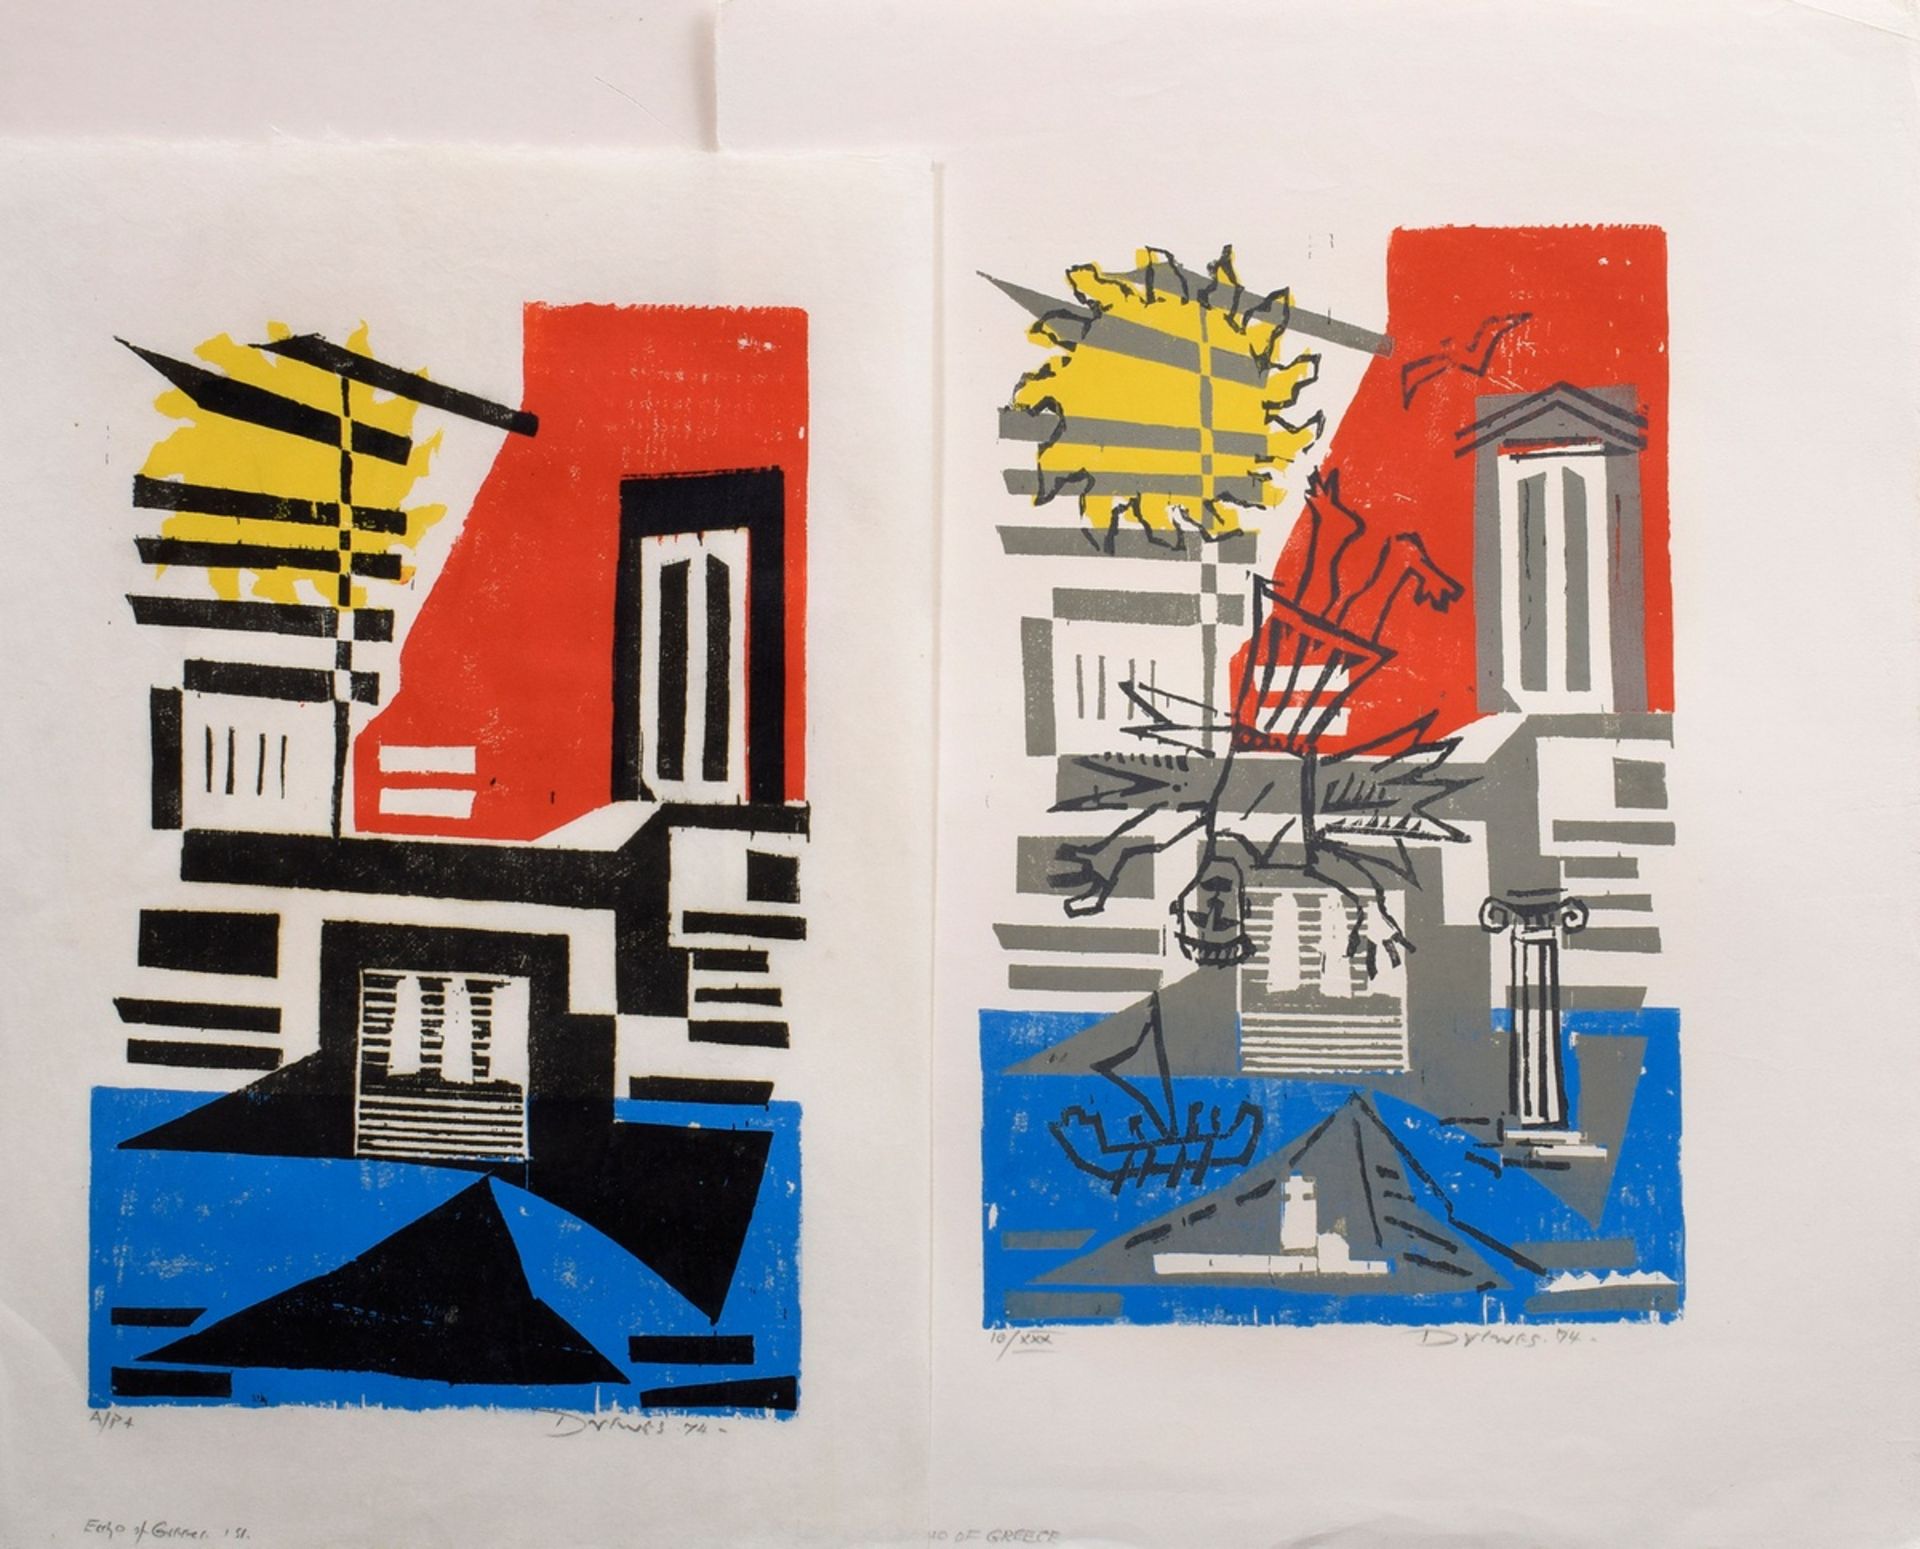 2 Drewes, Werner (1899-1985) "Echo of Greece" 1974, color woodcuts, proof (4) and 10/30, b. sign./d